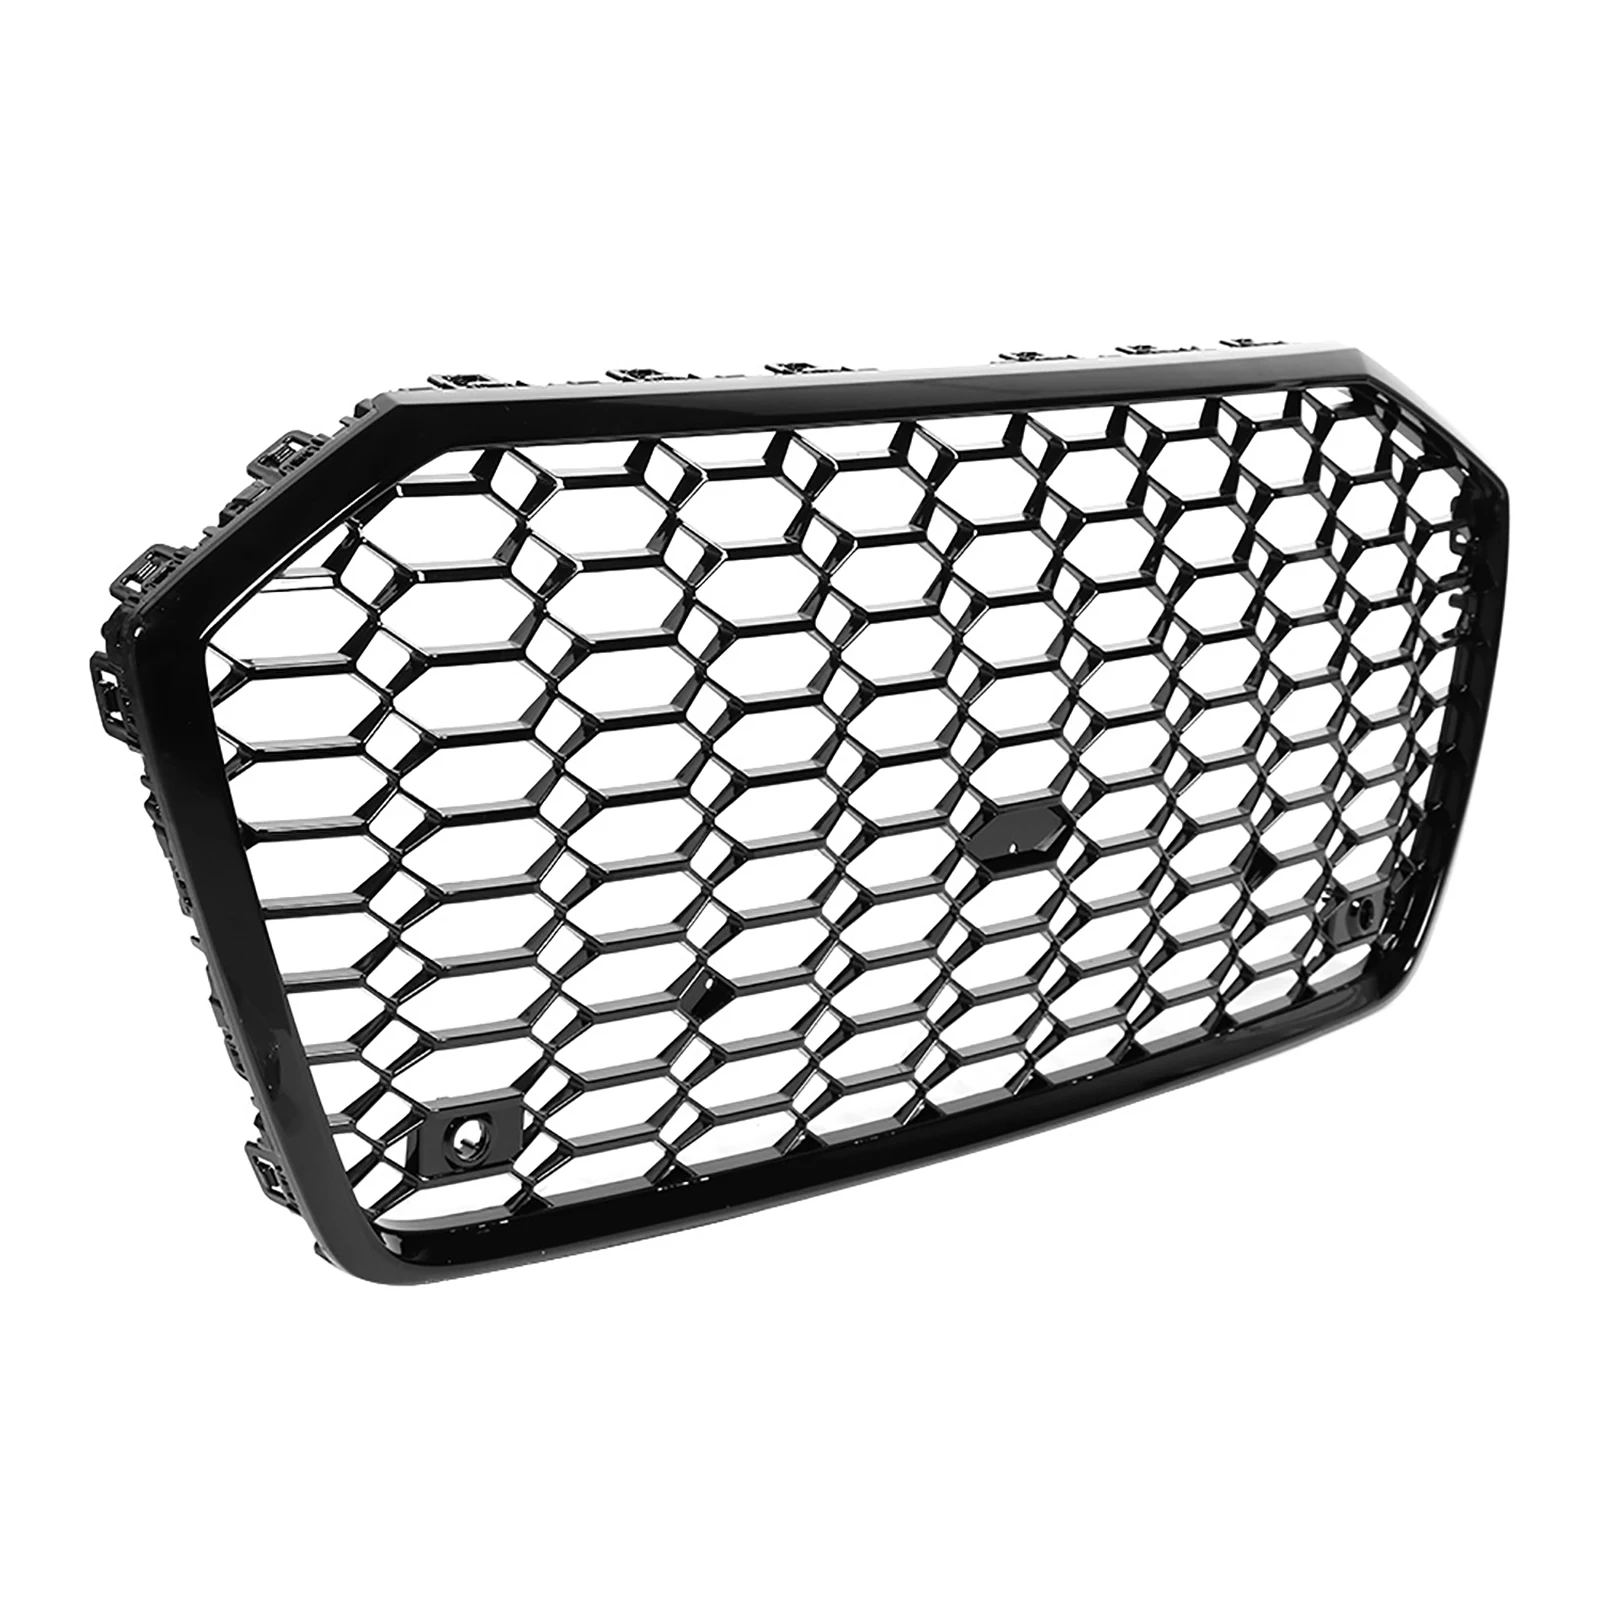 for Audi A6 C8 2019-2021 refit for RS6 style black color accessories fit YKPDM Front apron Mesh grille